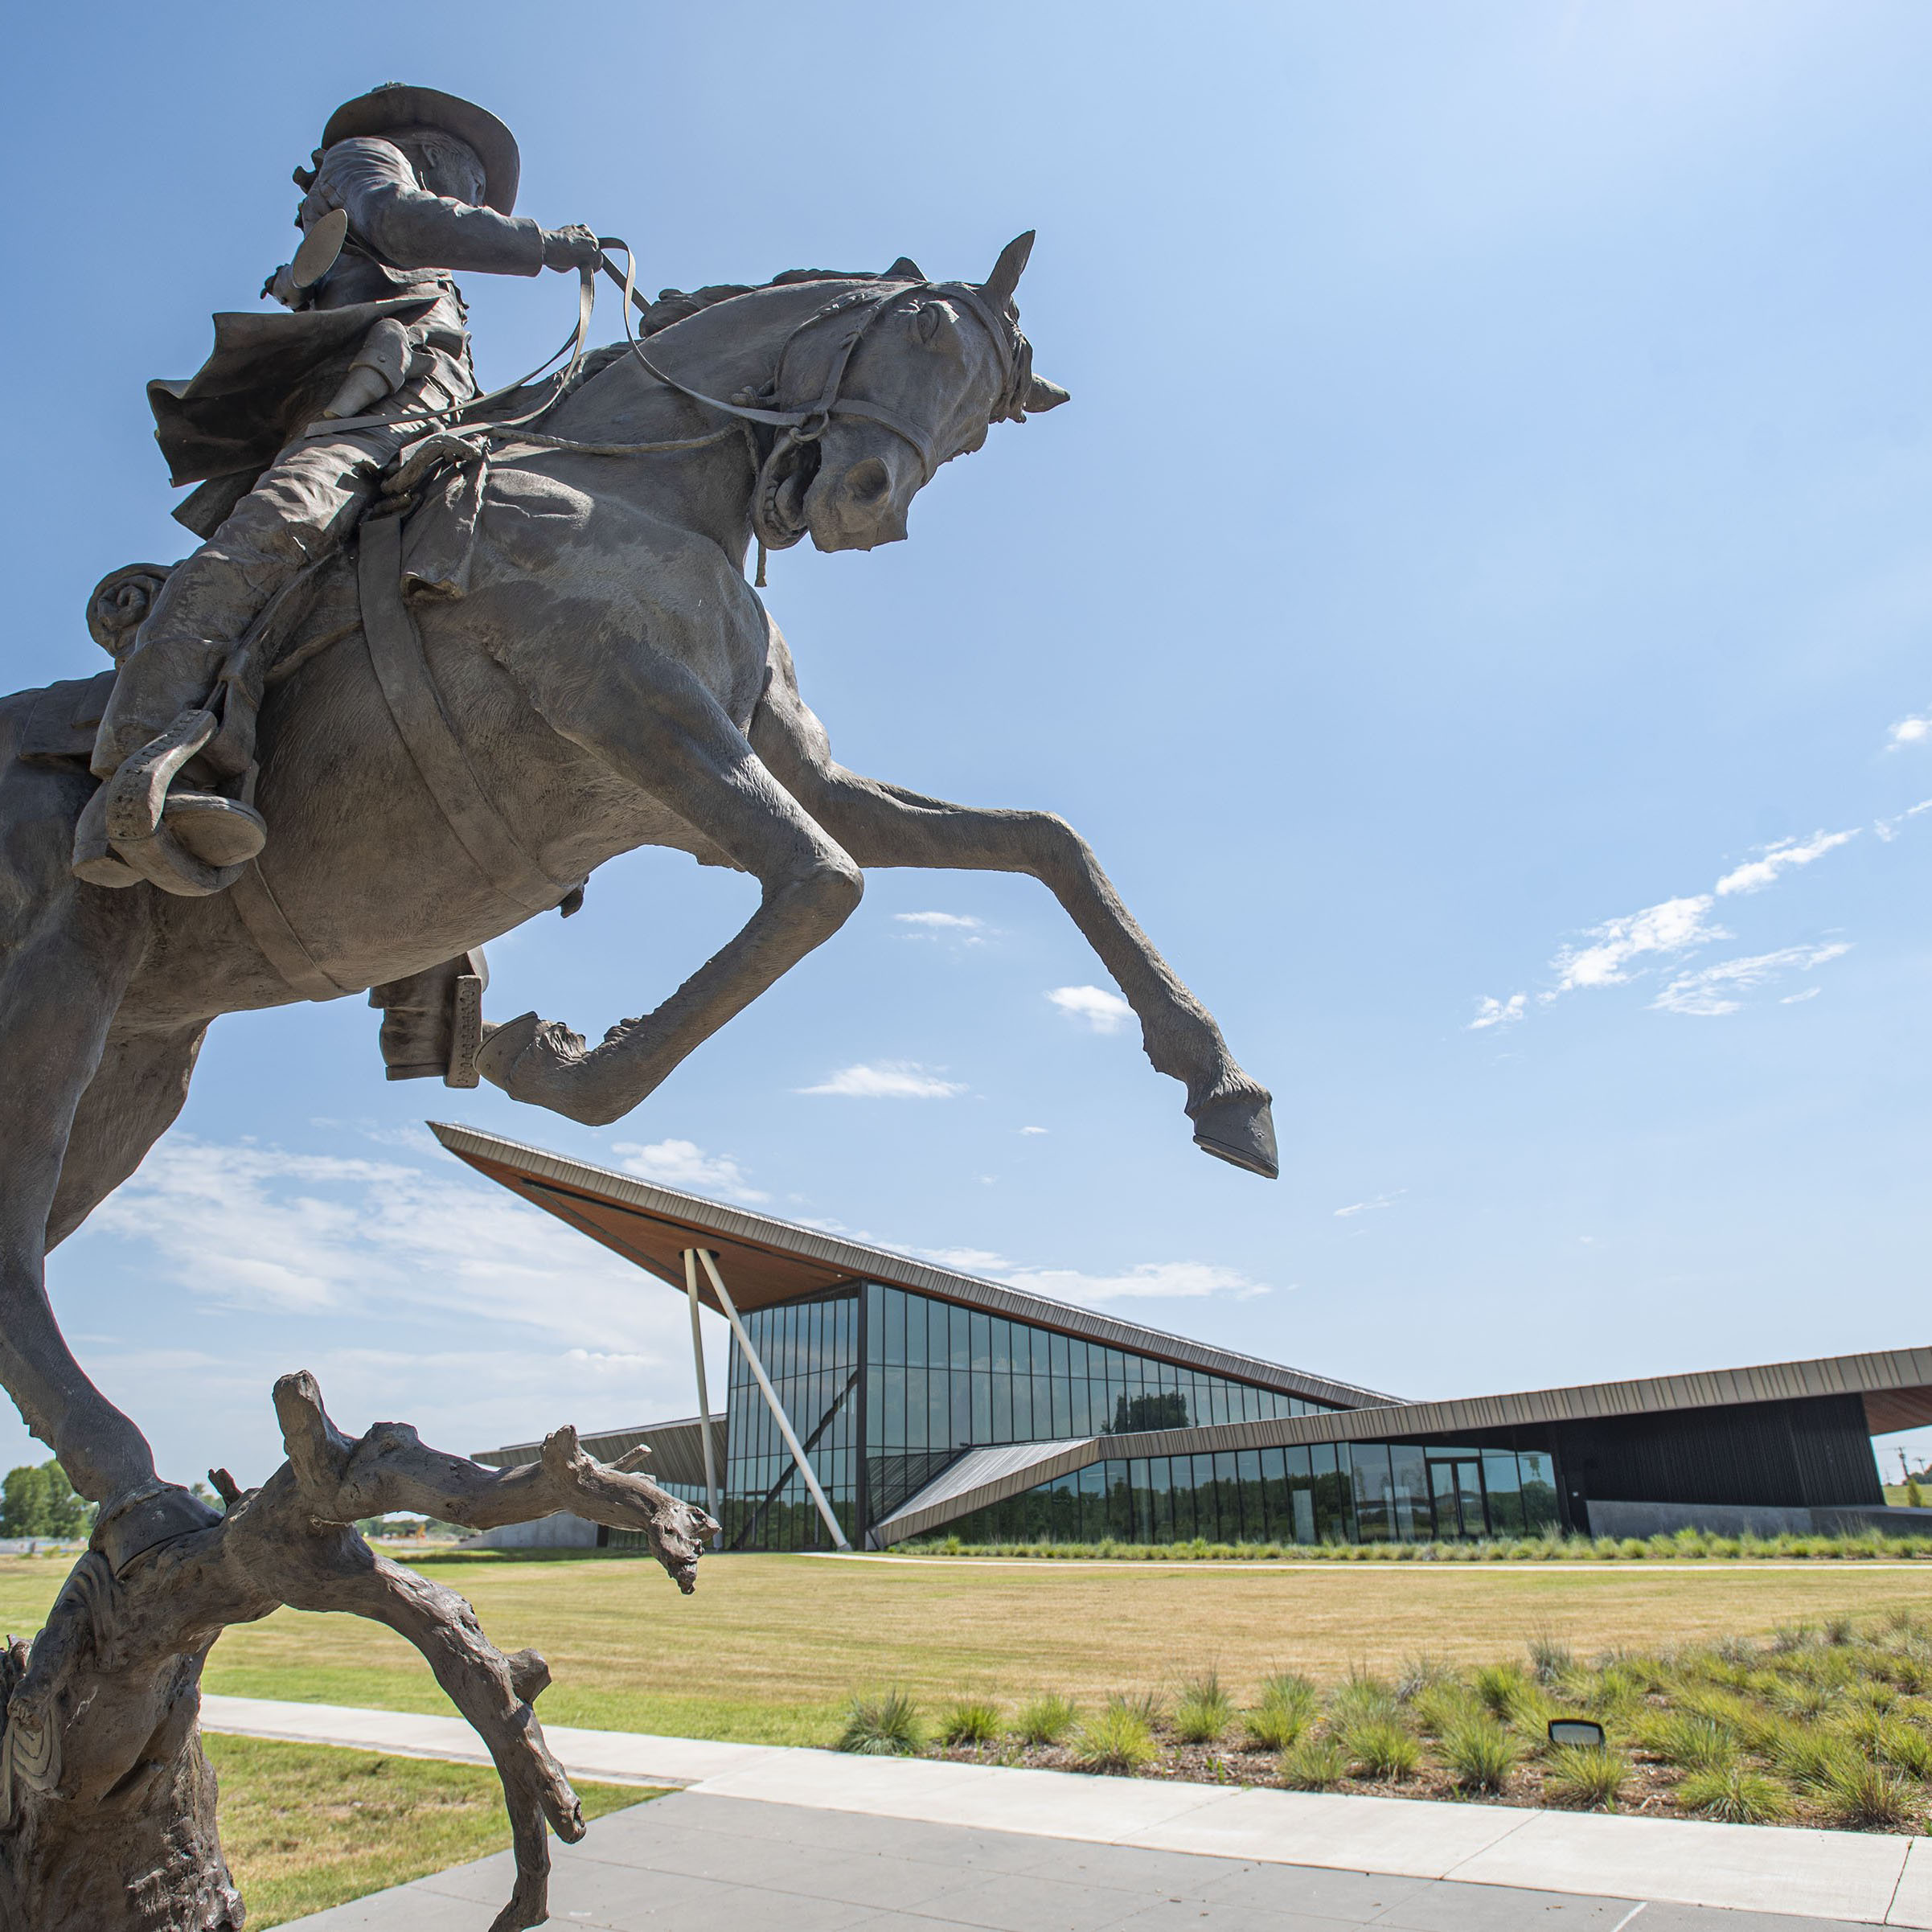 After 10 years, the U.S. Marshals Museum will open in Fort Smith